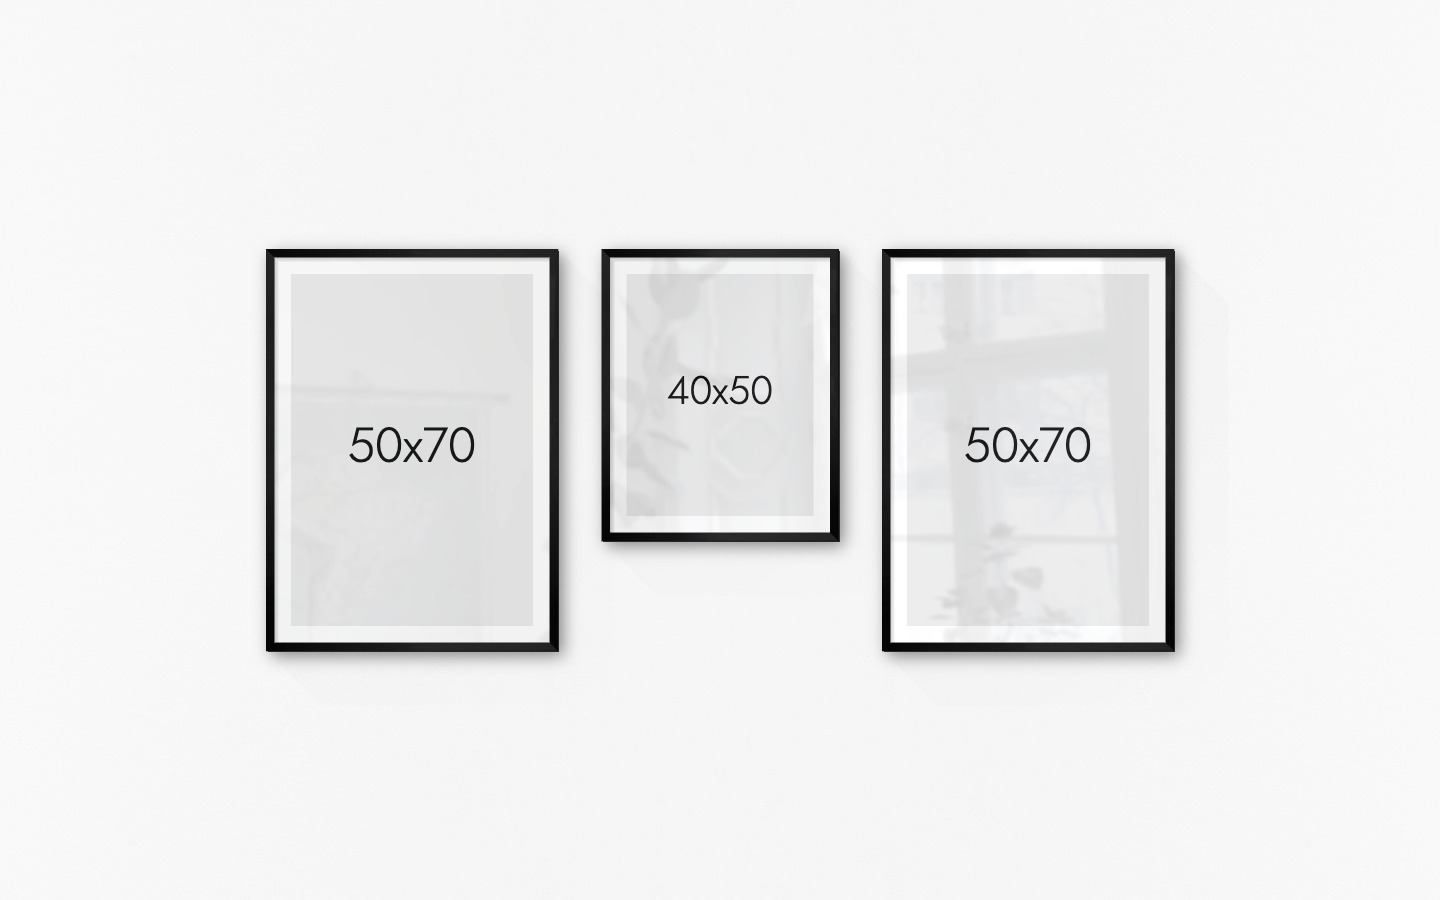 Gallery wall with picture frames in black in sizes 50x70 and 40x50